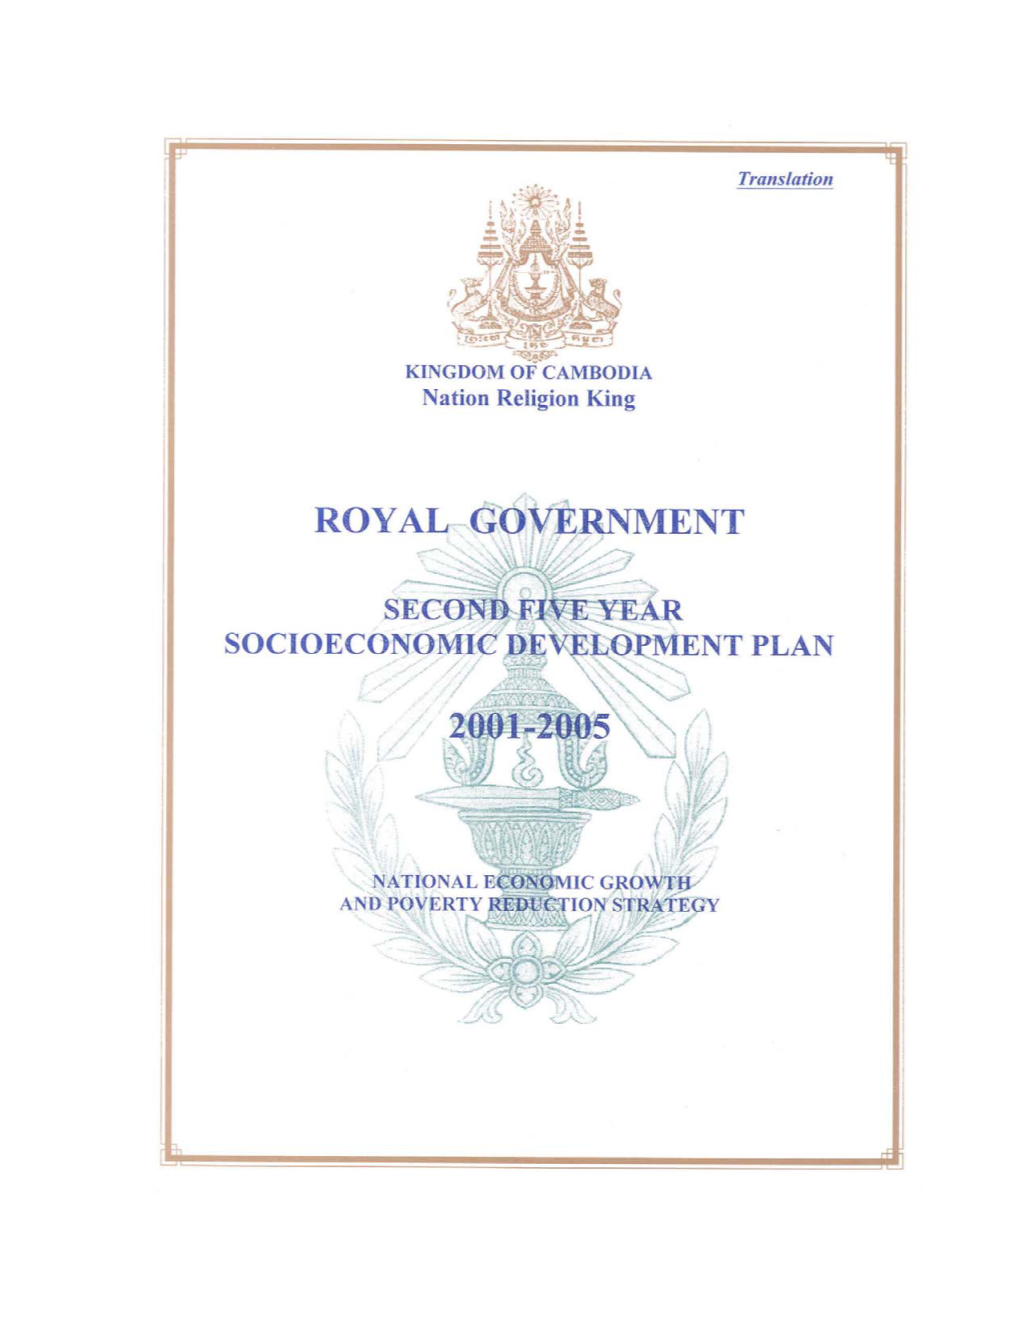 Socio-Economic Development Plan 2001-2006 (SEDPII) Articulates the National Economic Growth and Poverty Reduction Strategy of the Royal Government of Cambodia